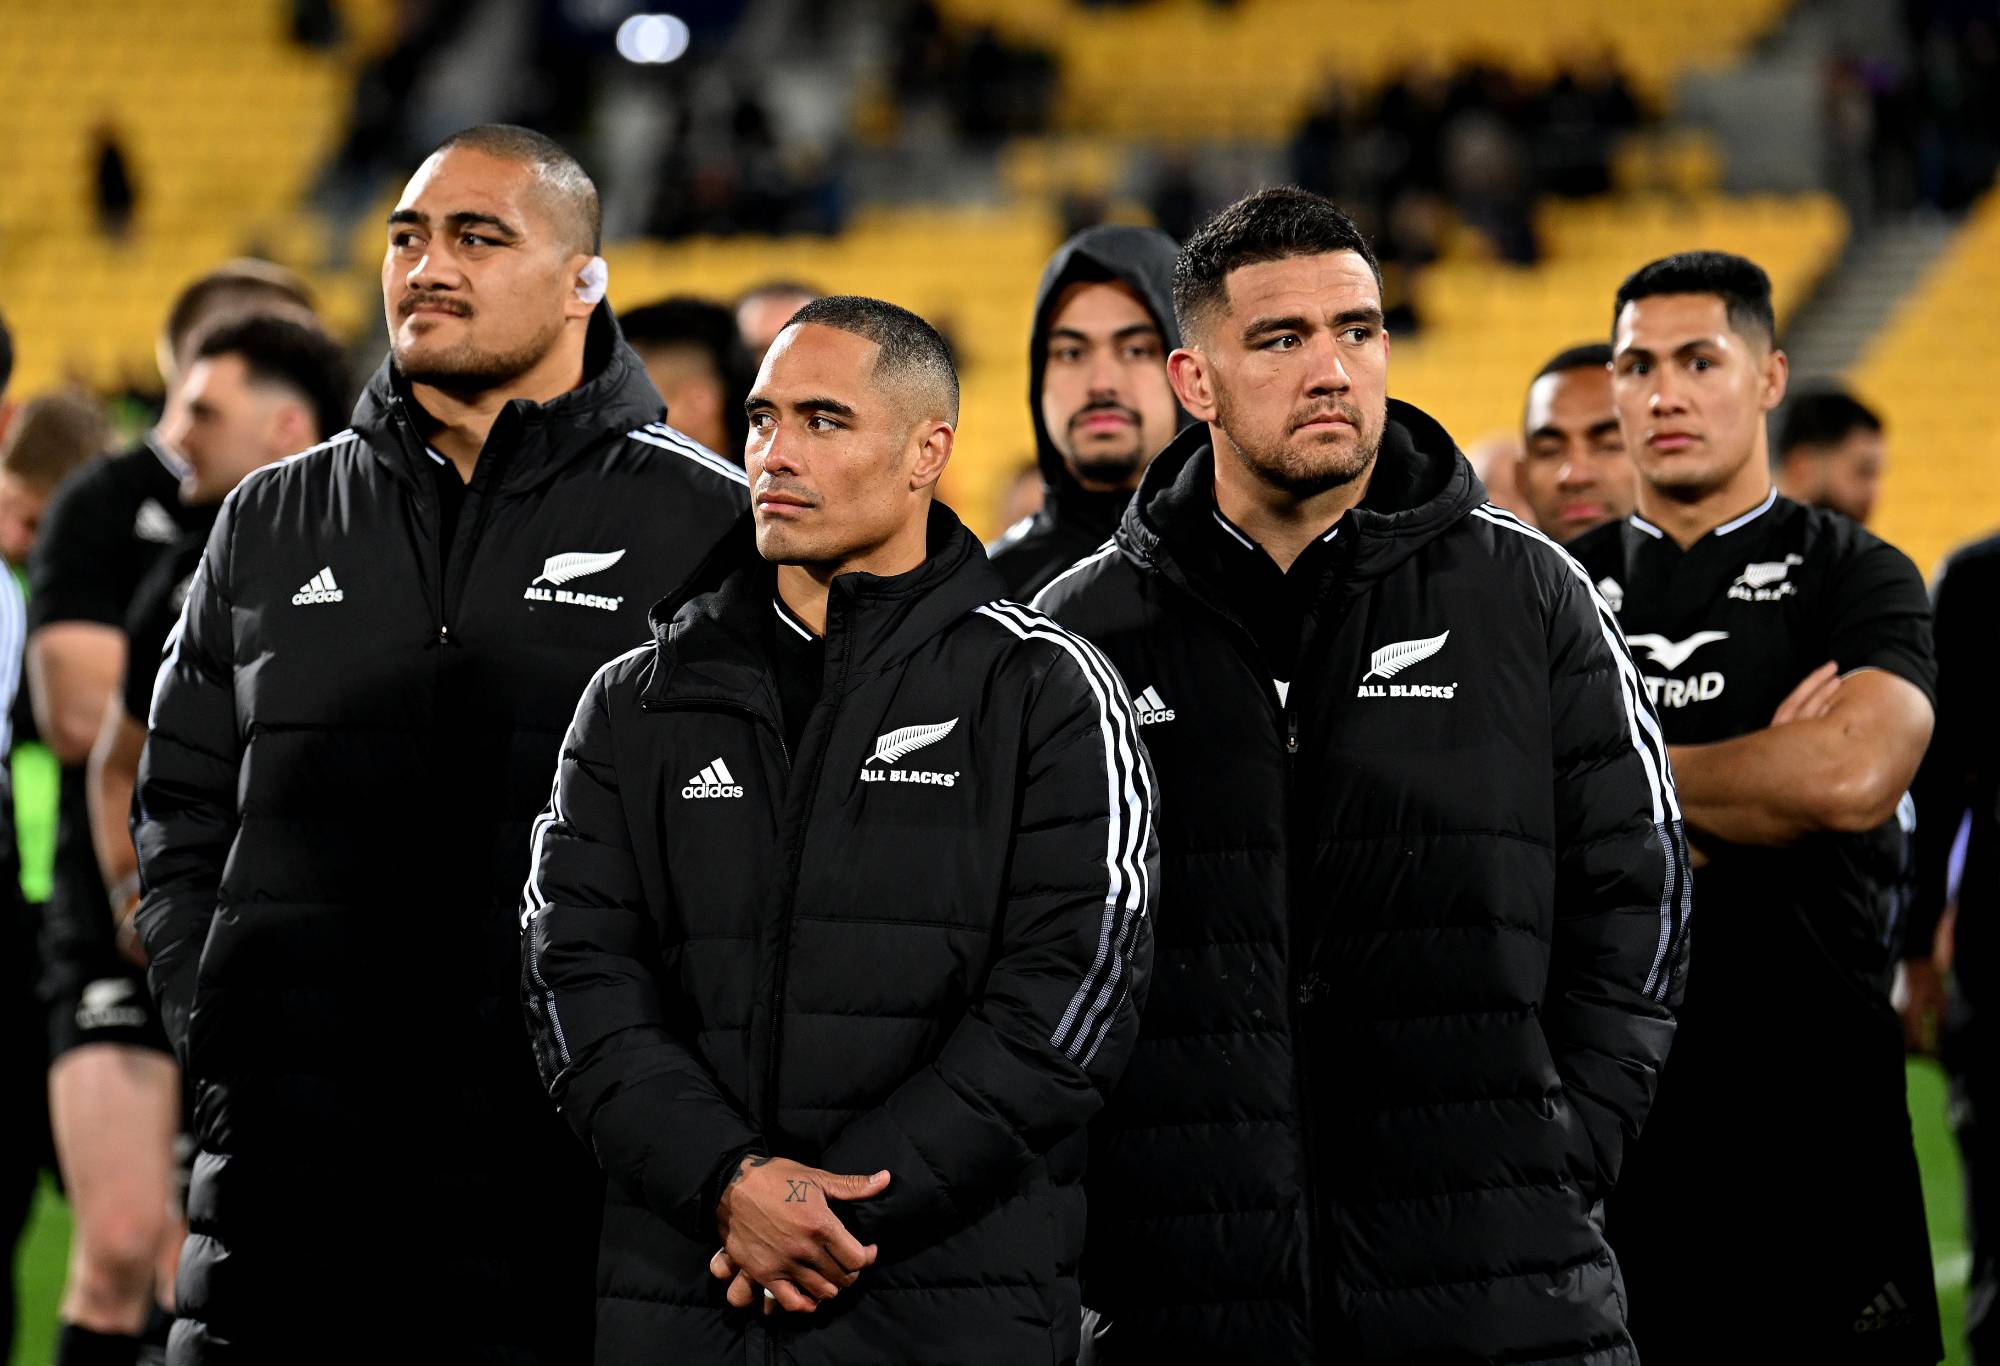 : A dejected Aaron Smith of the All Blacks looks on following the International Test match between the New Zealand All Blacks and Ireland at Sky Stadium on July 16, 2022 in Wellington, New Zealand. (Photo by Joe Allison/Getty Images)